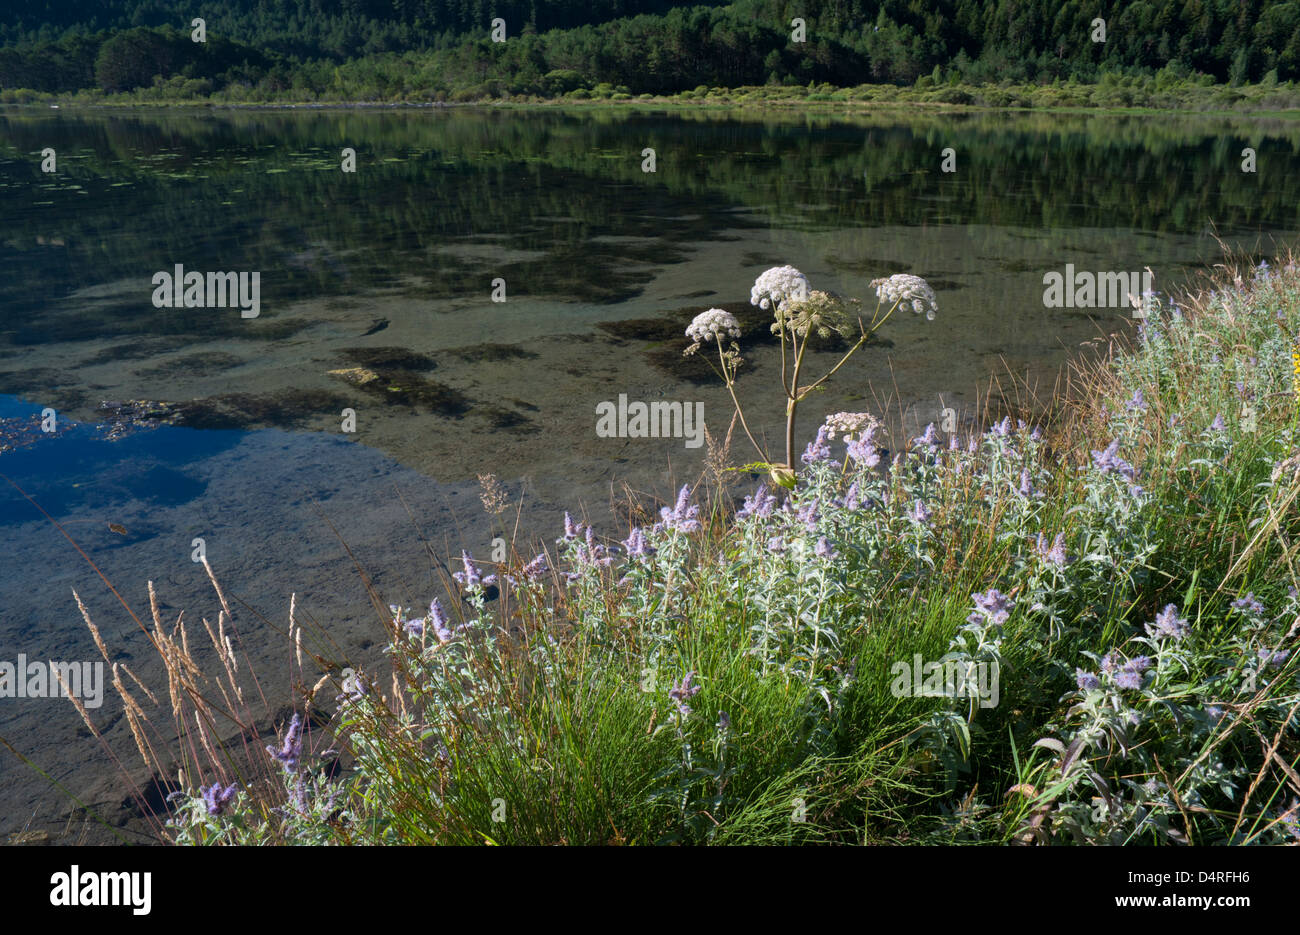 Wild flowers in July on the bank of the Bielsa Reservoir in the Pyrenees of Huesca Province, Aragon, Spain Stock Photo